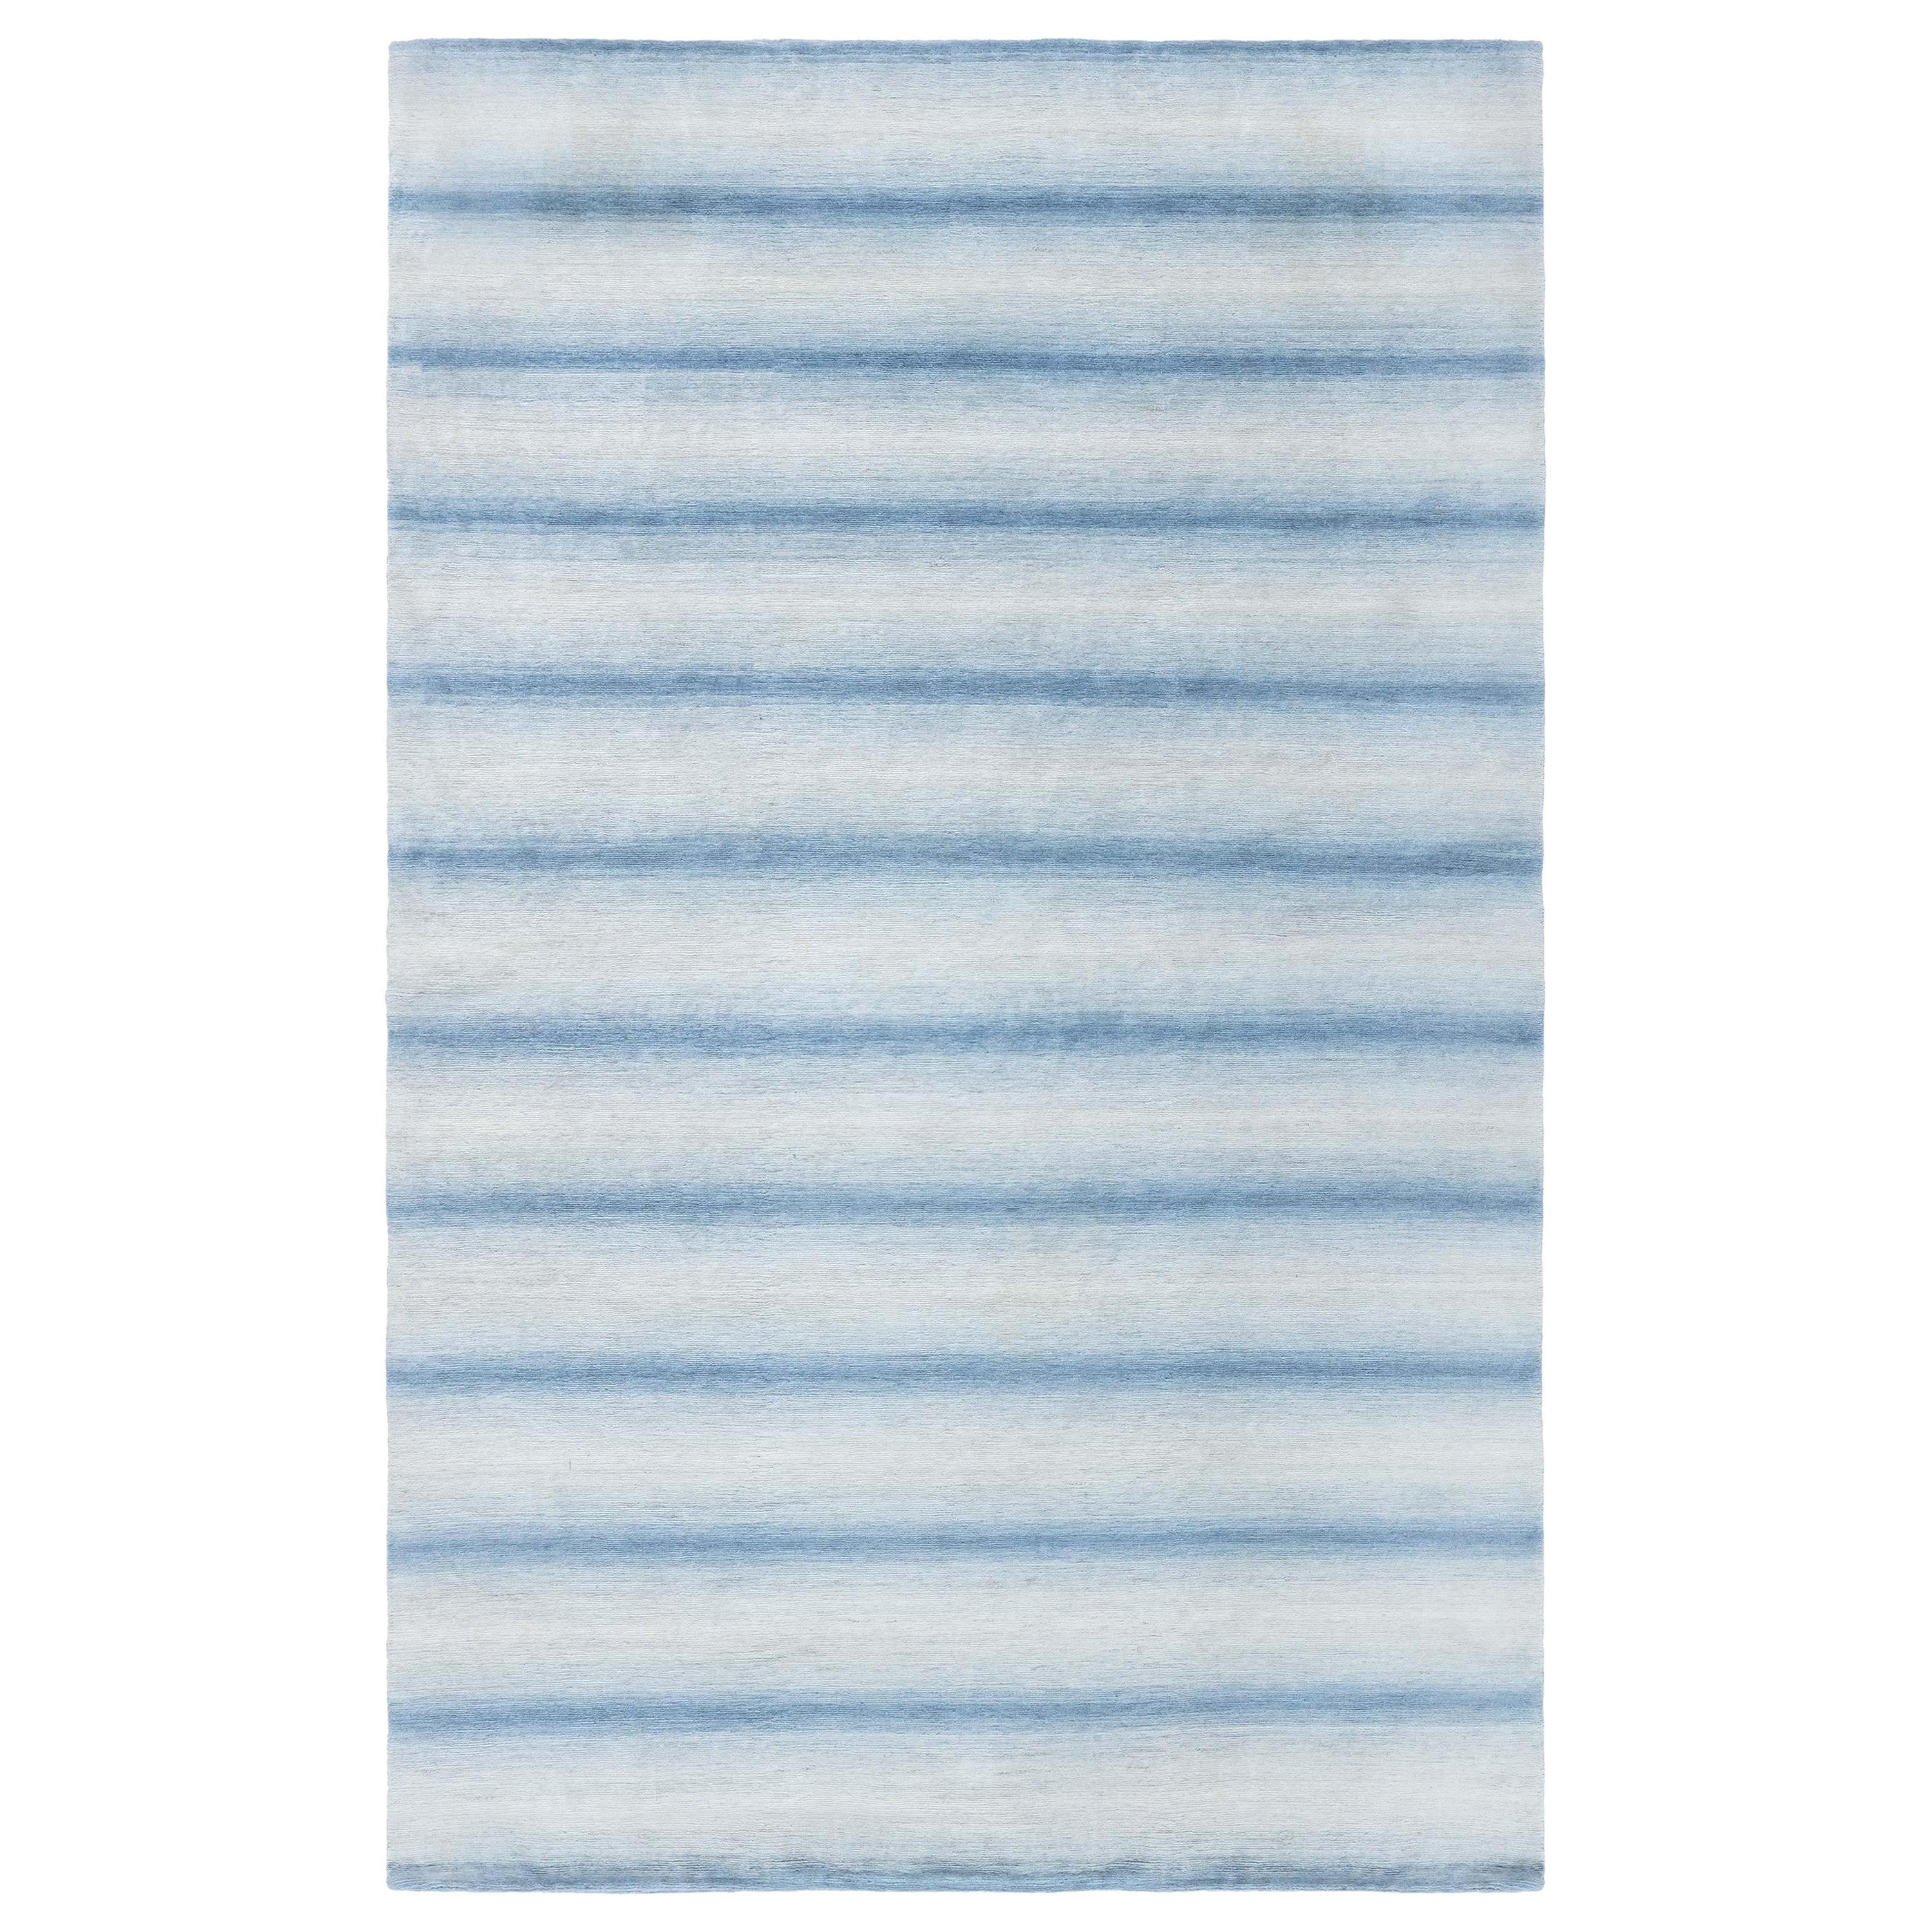 Contemporary Striped Blue Hand Knotted Wool Rug by Doris Leslie Blau